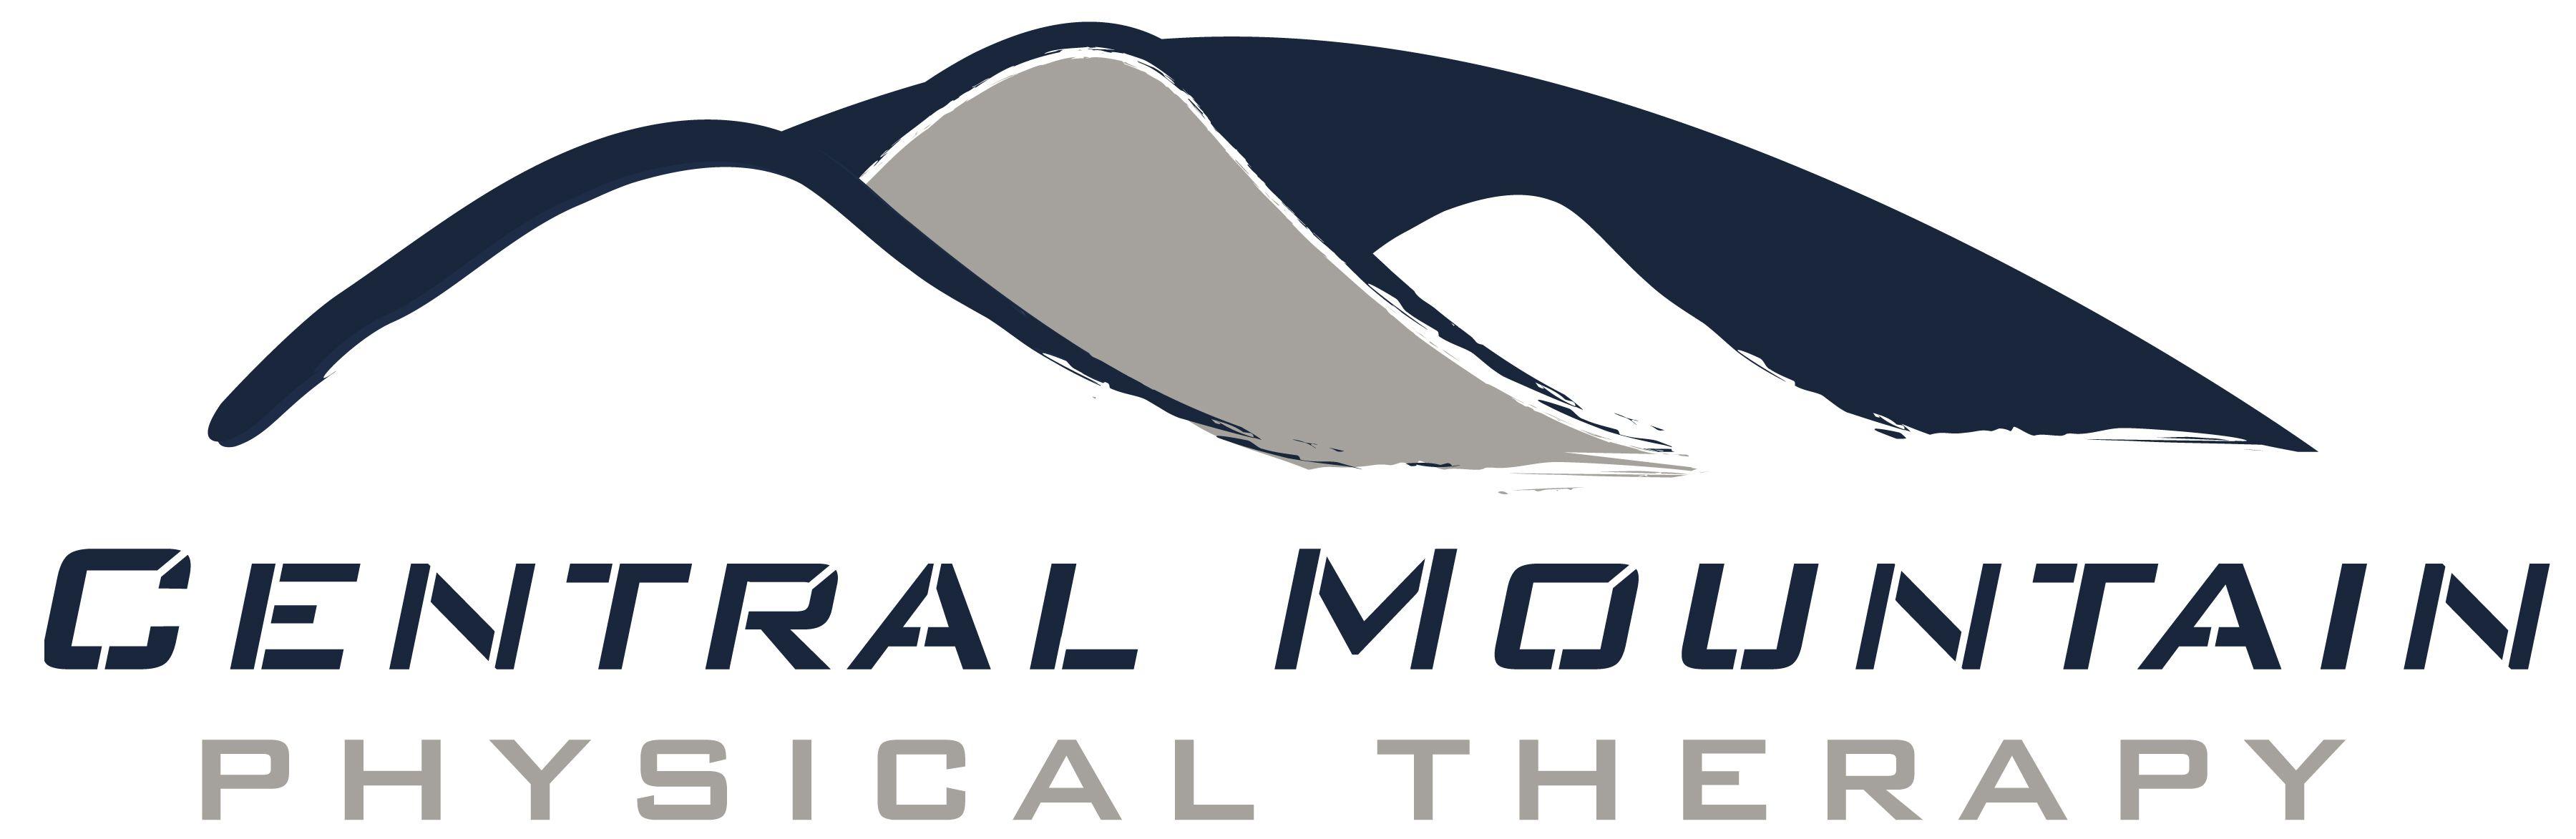 Central Mountain Logo - Central Mountain Physical Therapy Staff: Troy & Lori Dinges, Mike ...